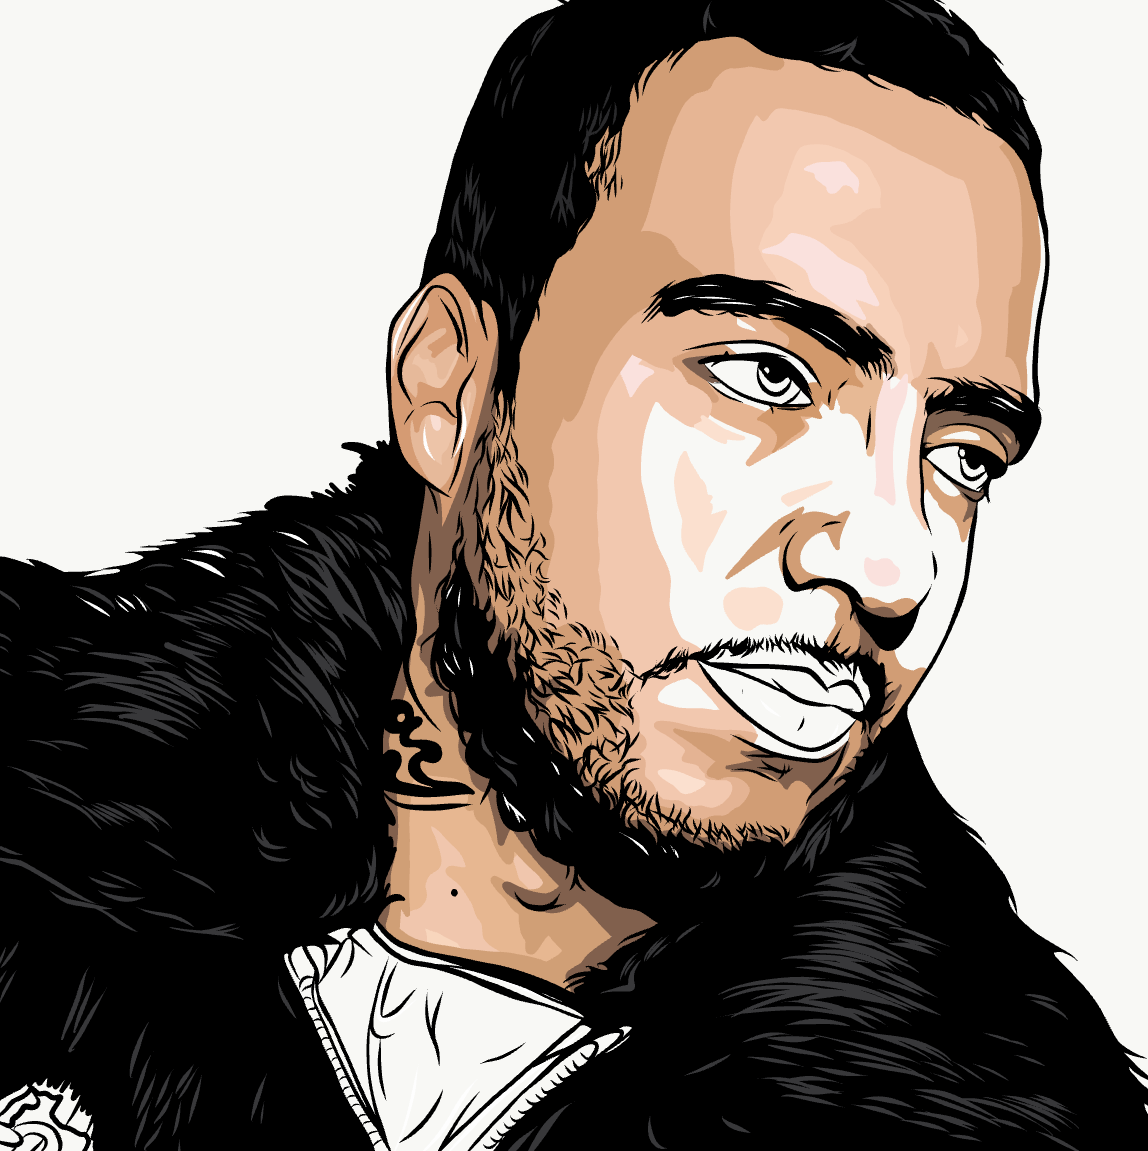 ciroc French Montana frenchmontana coke cokeboys vanilla hiphop unforgetable cool Urban trendy swag crazy dope silly funny graphics design ILLUSTRATION  fresh supreme beard Diddy Pdiddy brand logo